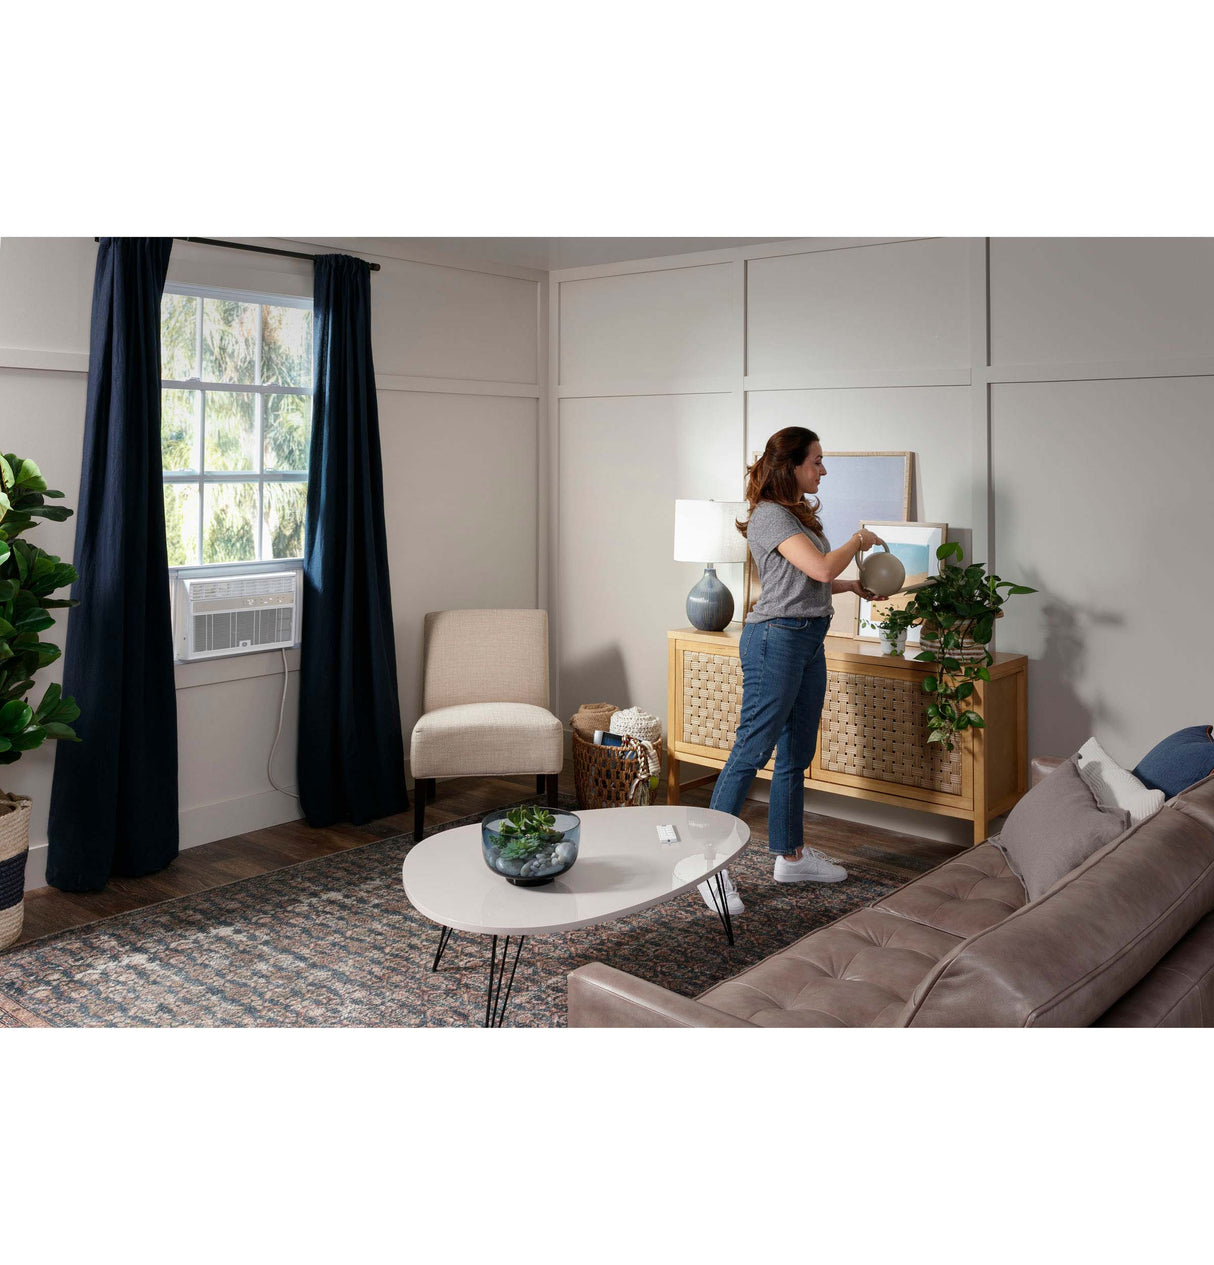 GE(R) ENERGY STAR(R) 10,000 BTU Smart Electronic Window Air Conditioner for Medium Rooms up to 450 sq. ft. - (AHY10LZ)